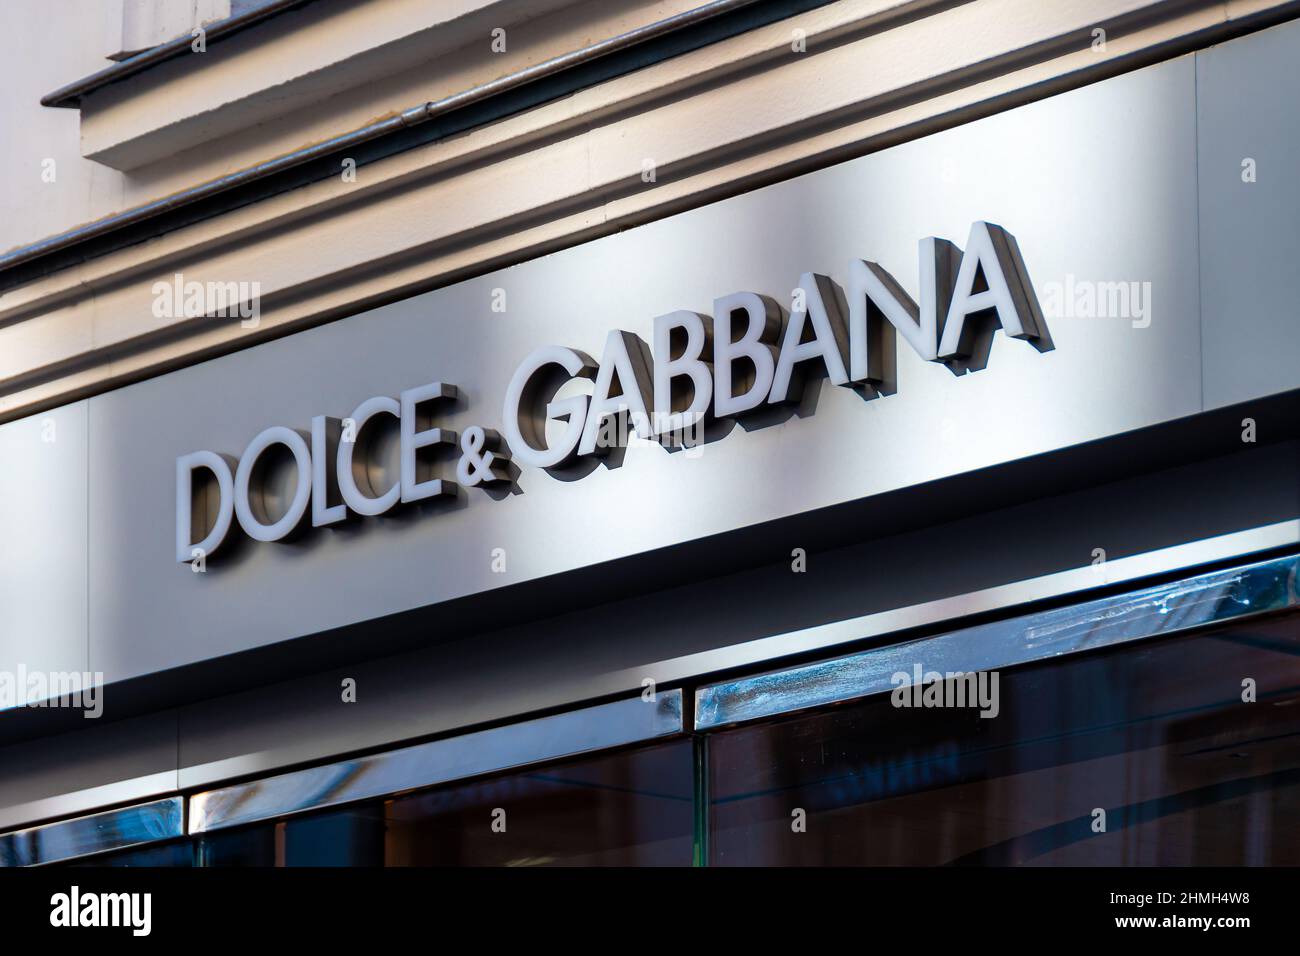 File:D&G shop, Milan, Italy (9474202582).jpg - Wikimedia Commons